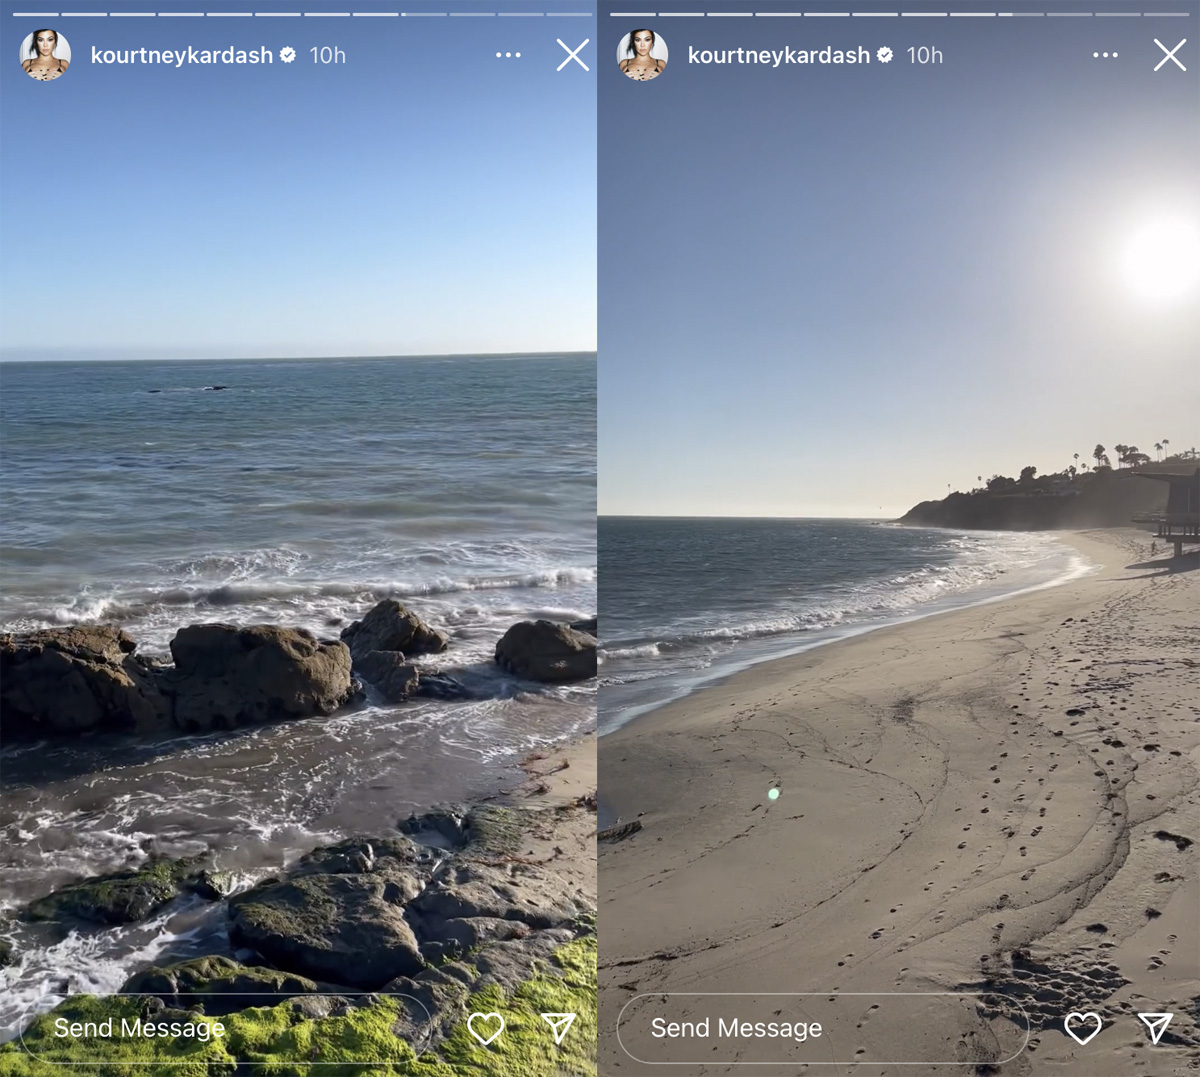 Travis Barker Enjoys A Beach Day & Flowers From Family As He Continues To Recover After Health Scare